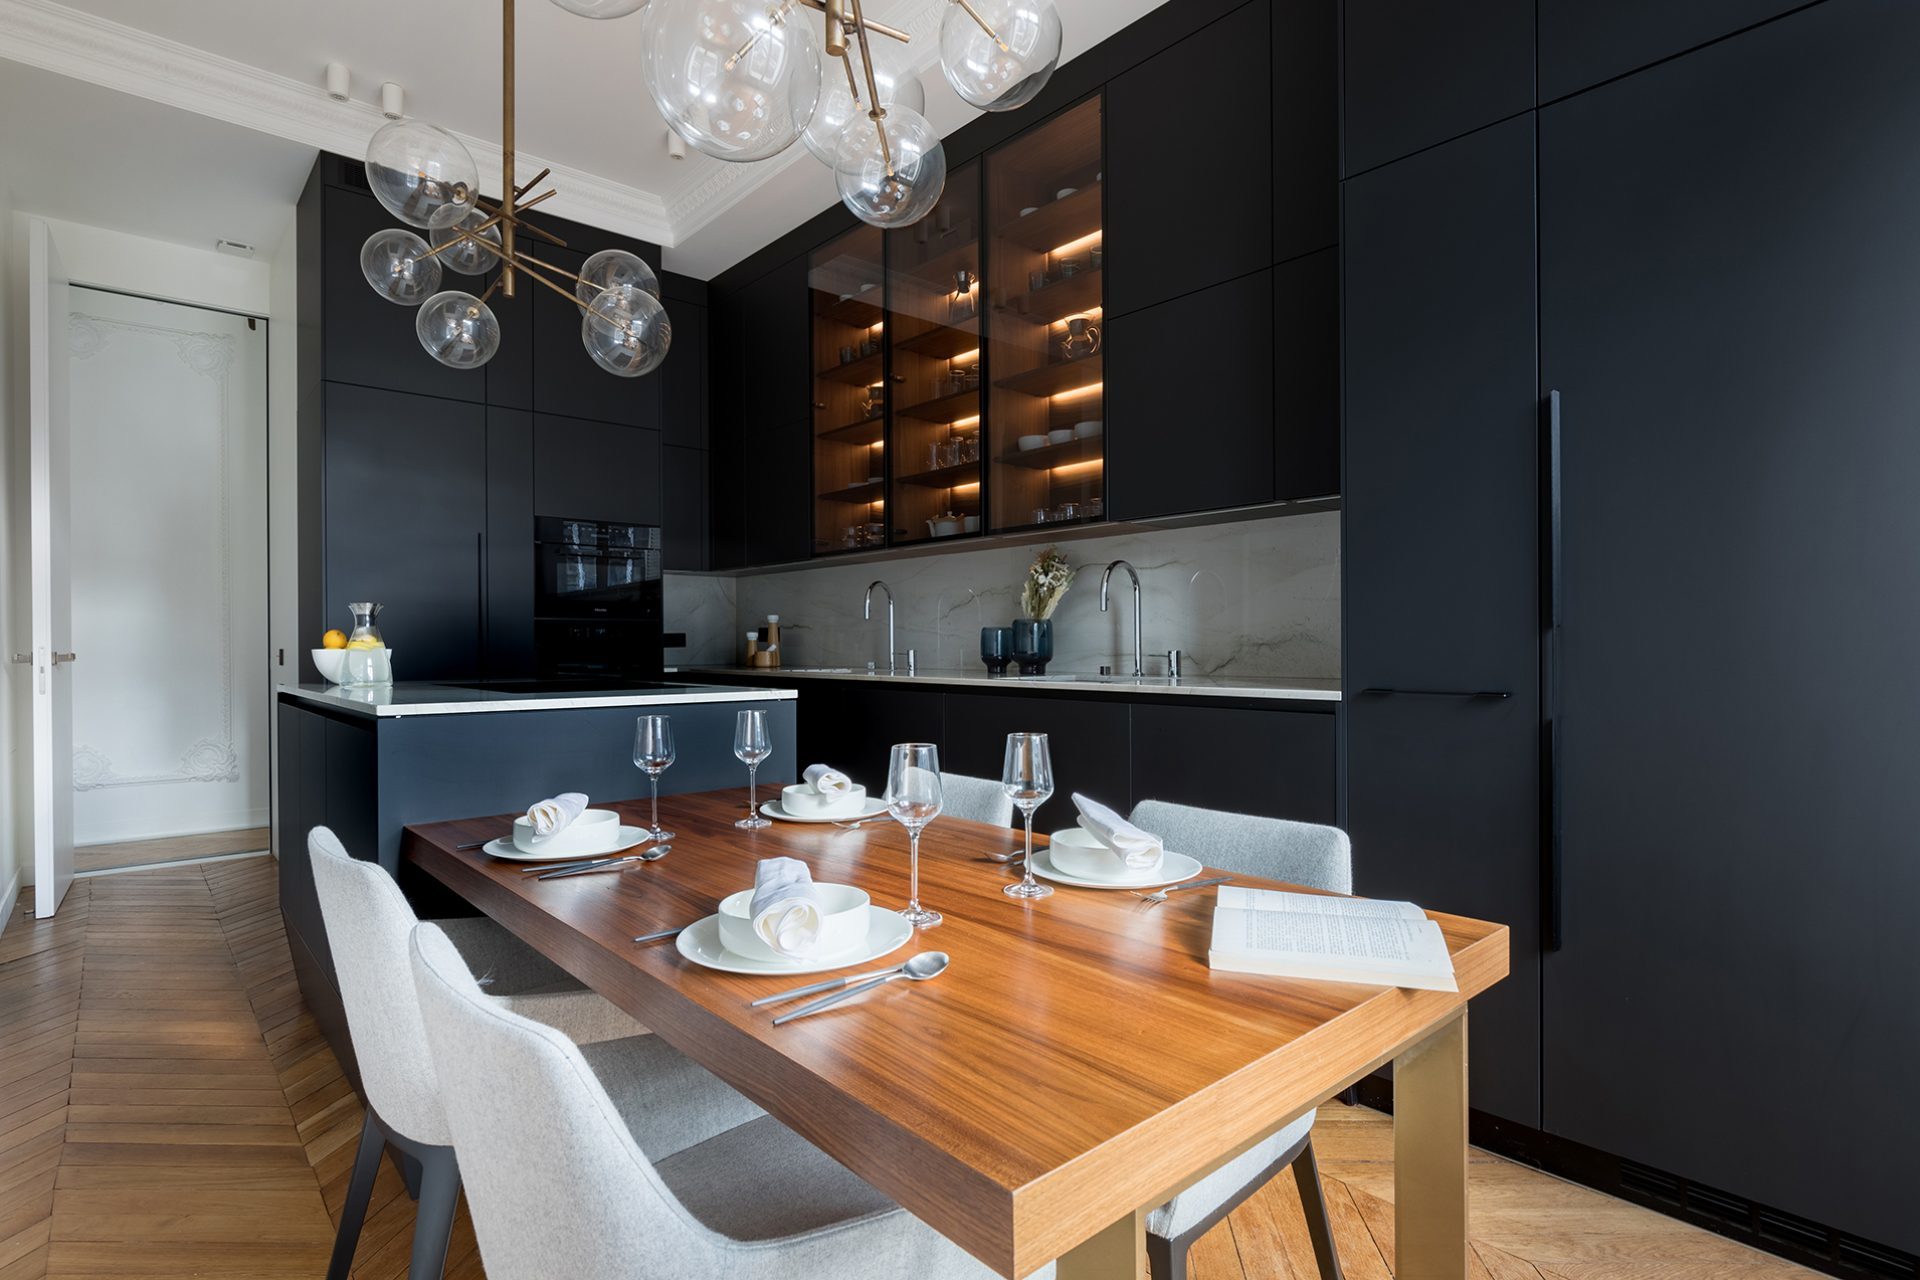 Image of black kitchen composed of column, tall and base units and a central island extended by a wooden table